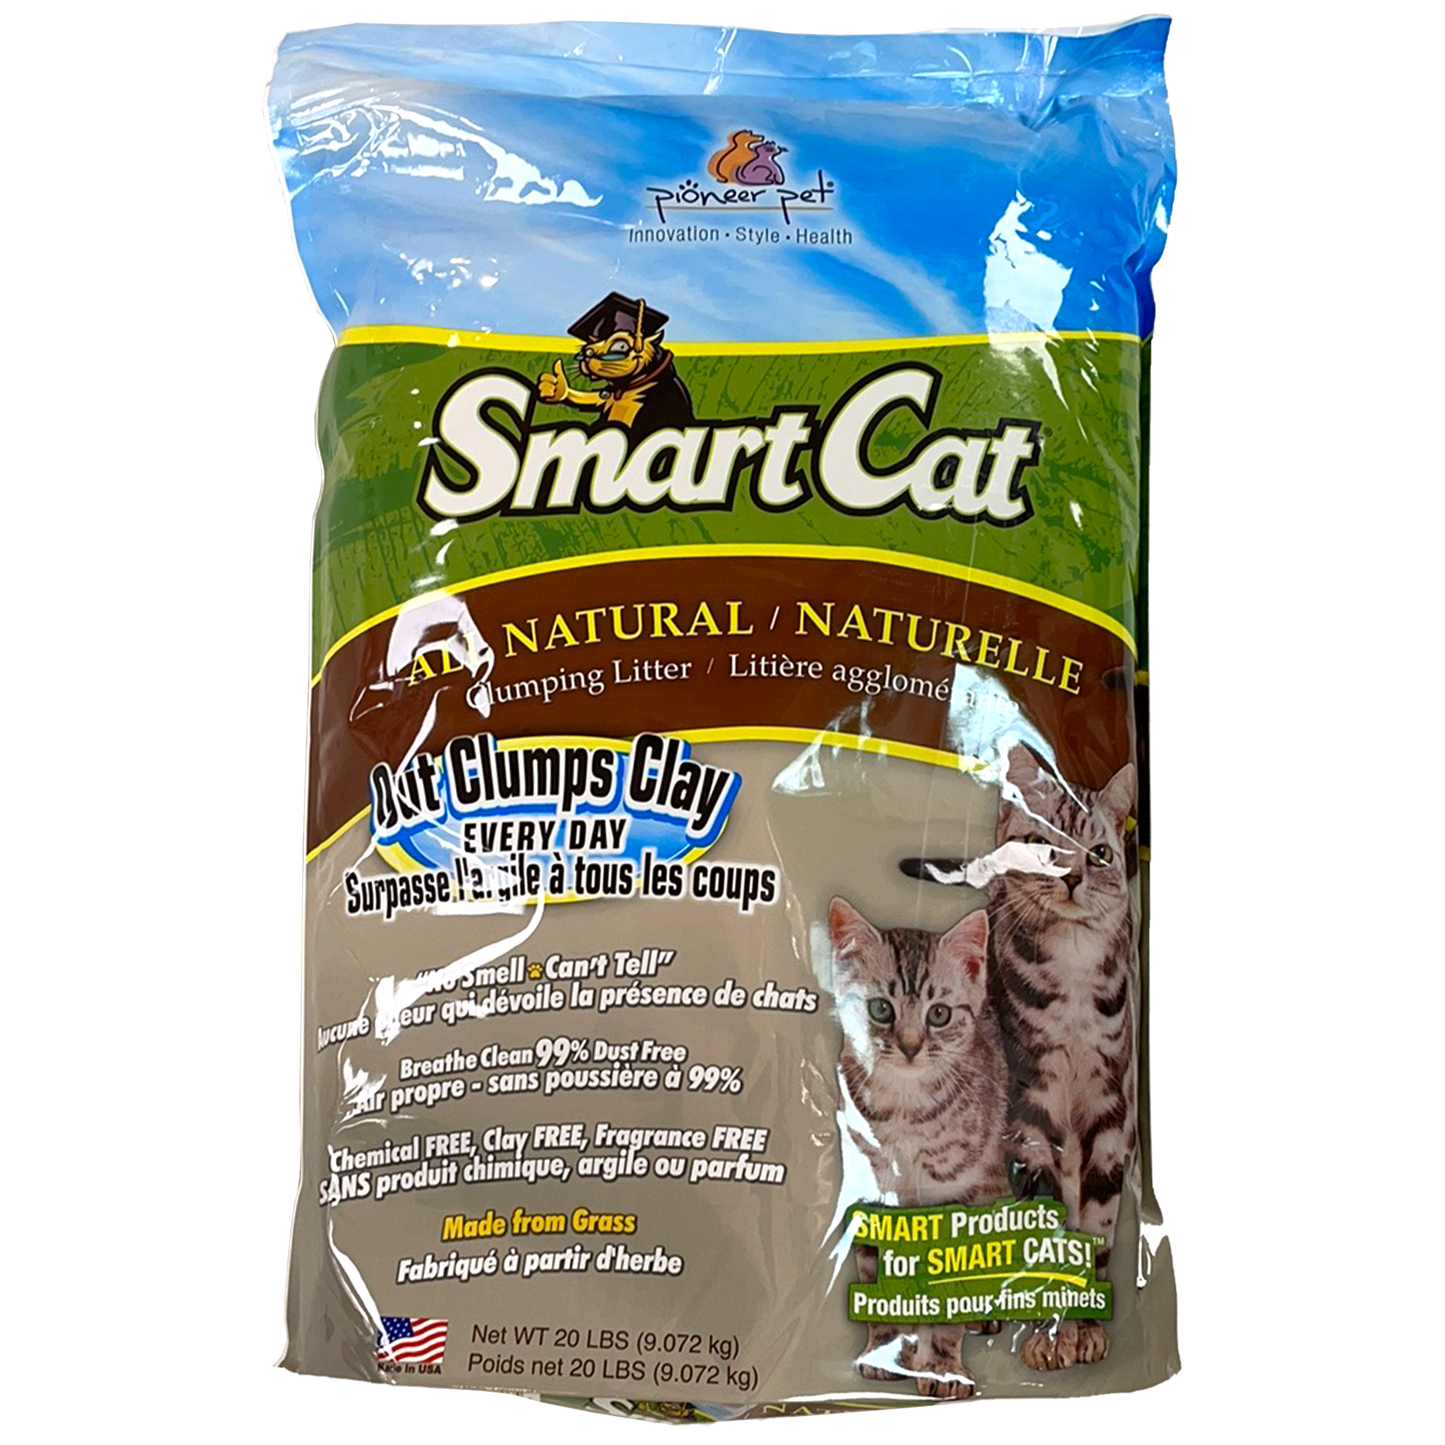 SmartCat All Natural Clumping Litter, Out Clumps Clay Everyday, 20lbs